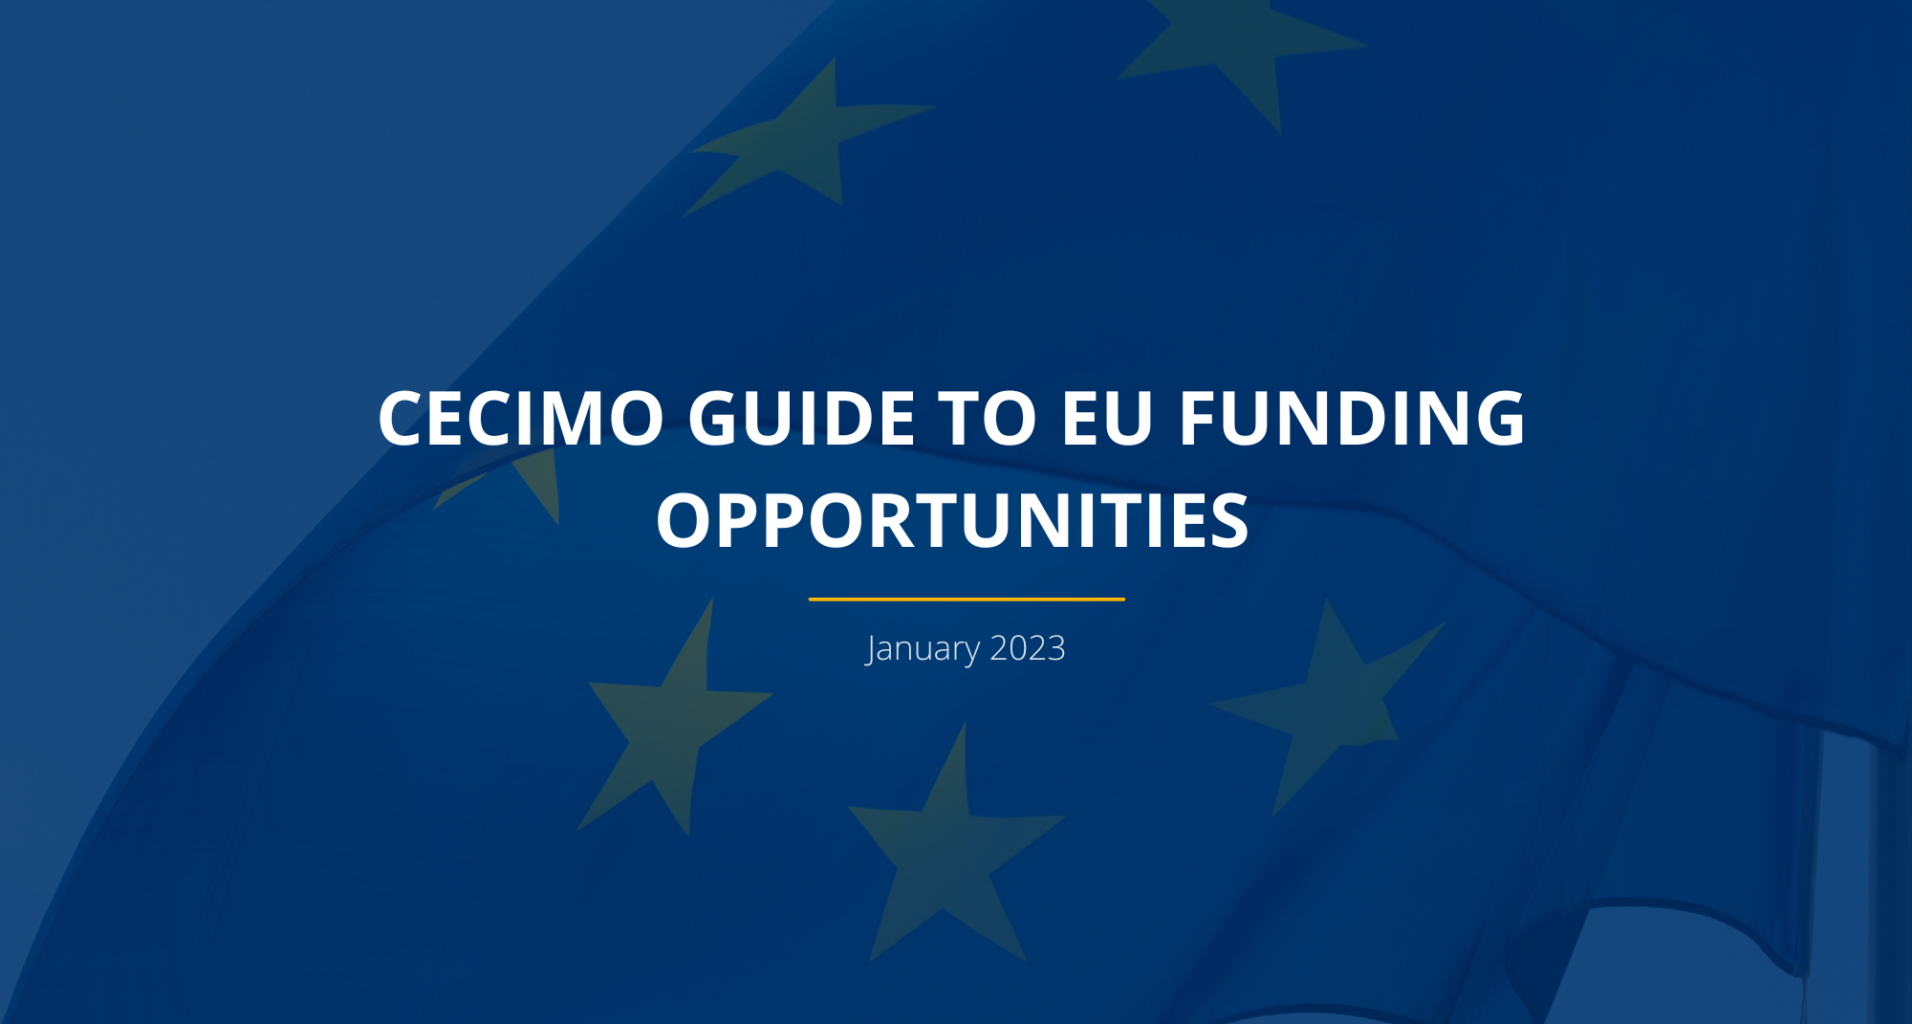 Updated CECIMO Guide to EU Funding Opportunities